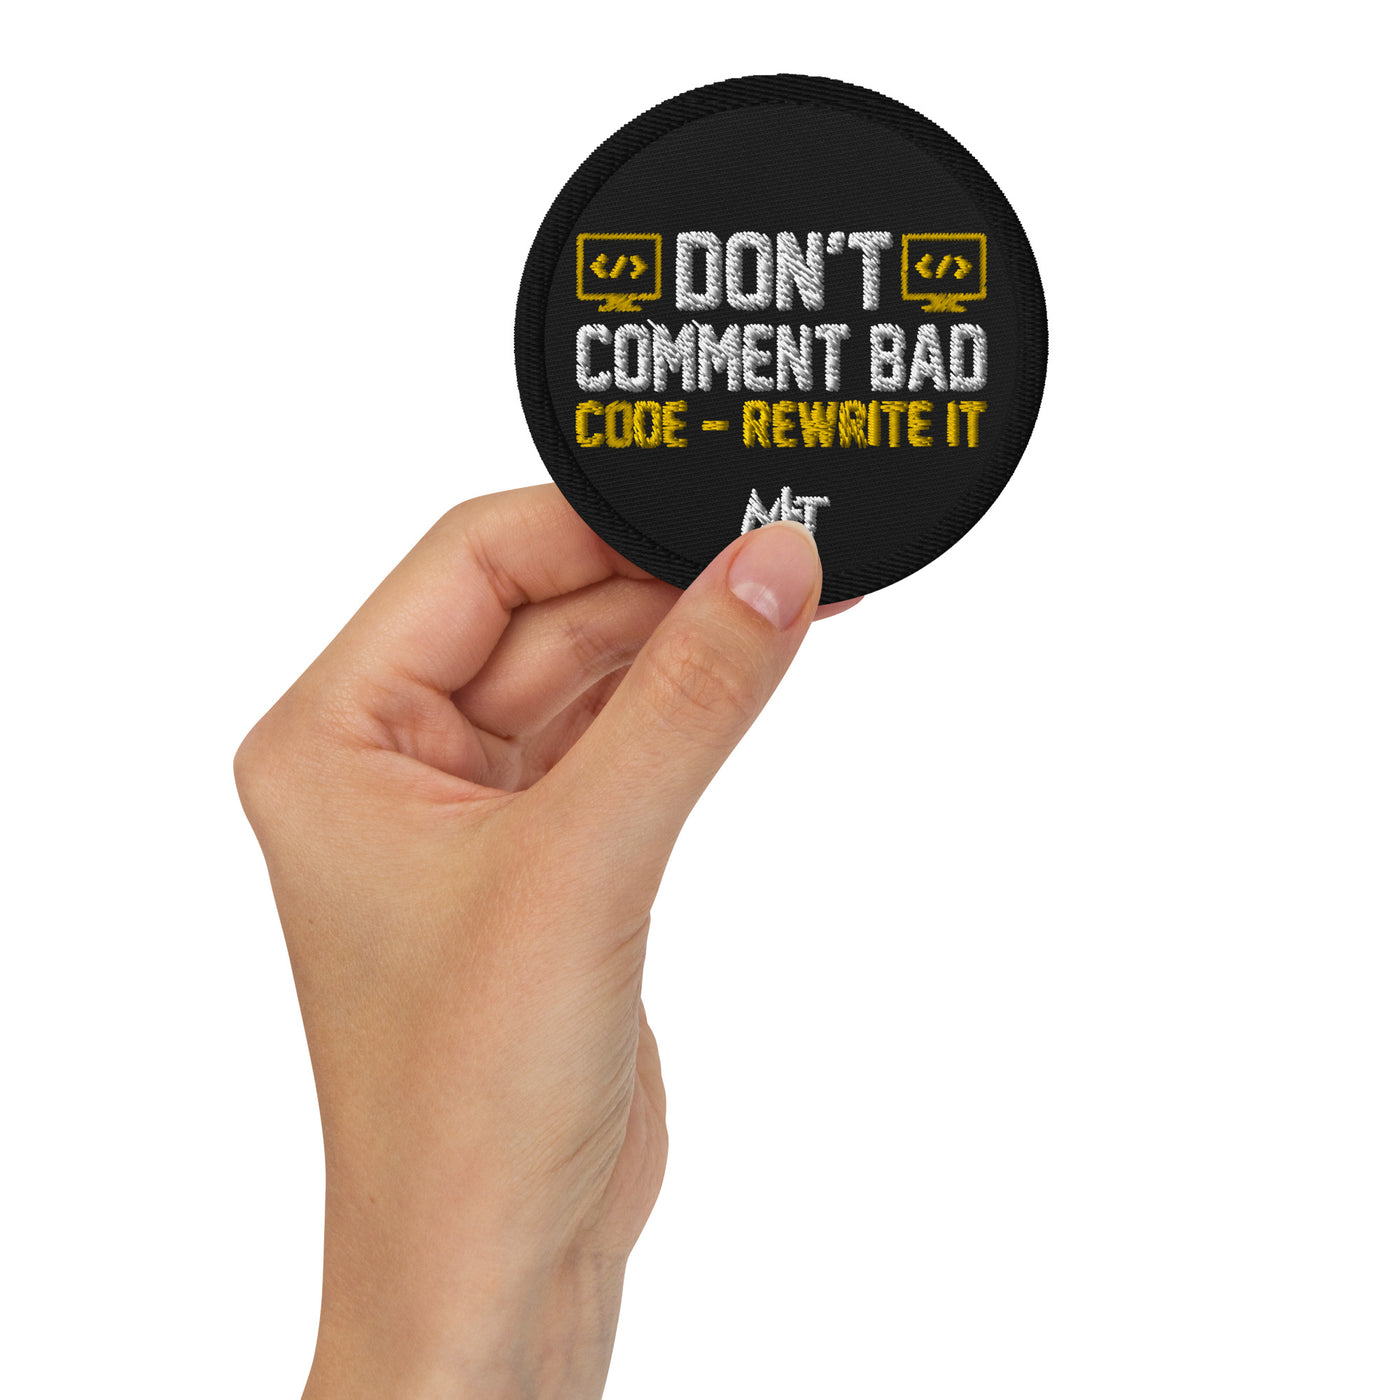 Don't comment Bad code, rewrite it - Embroidered patches